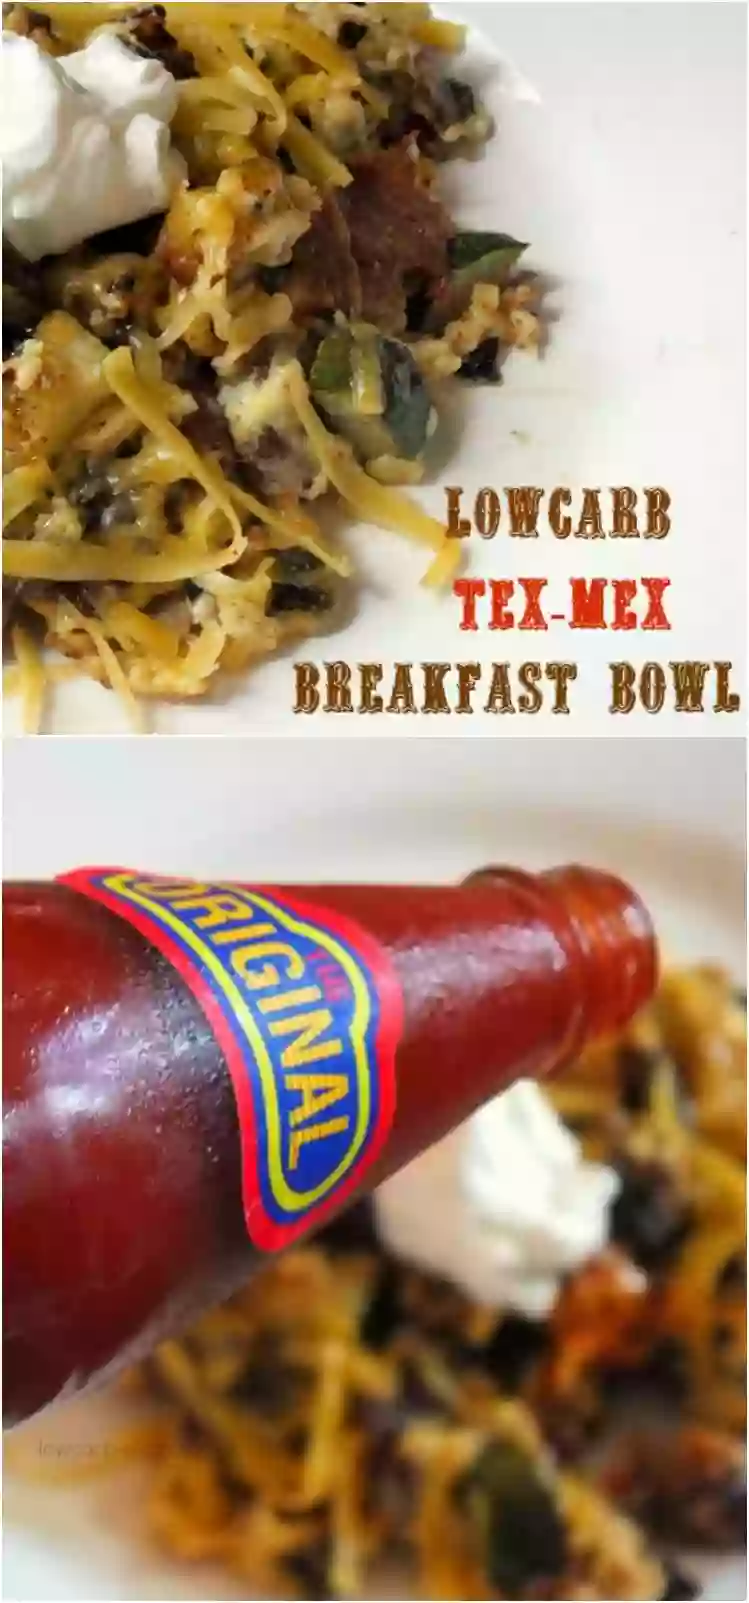 This Tex-Mex Breakfast Bowl is the perfect low carb breakfast recipe! Lowcarb-ology.com